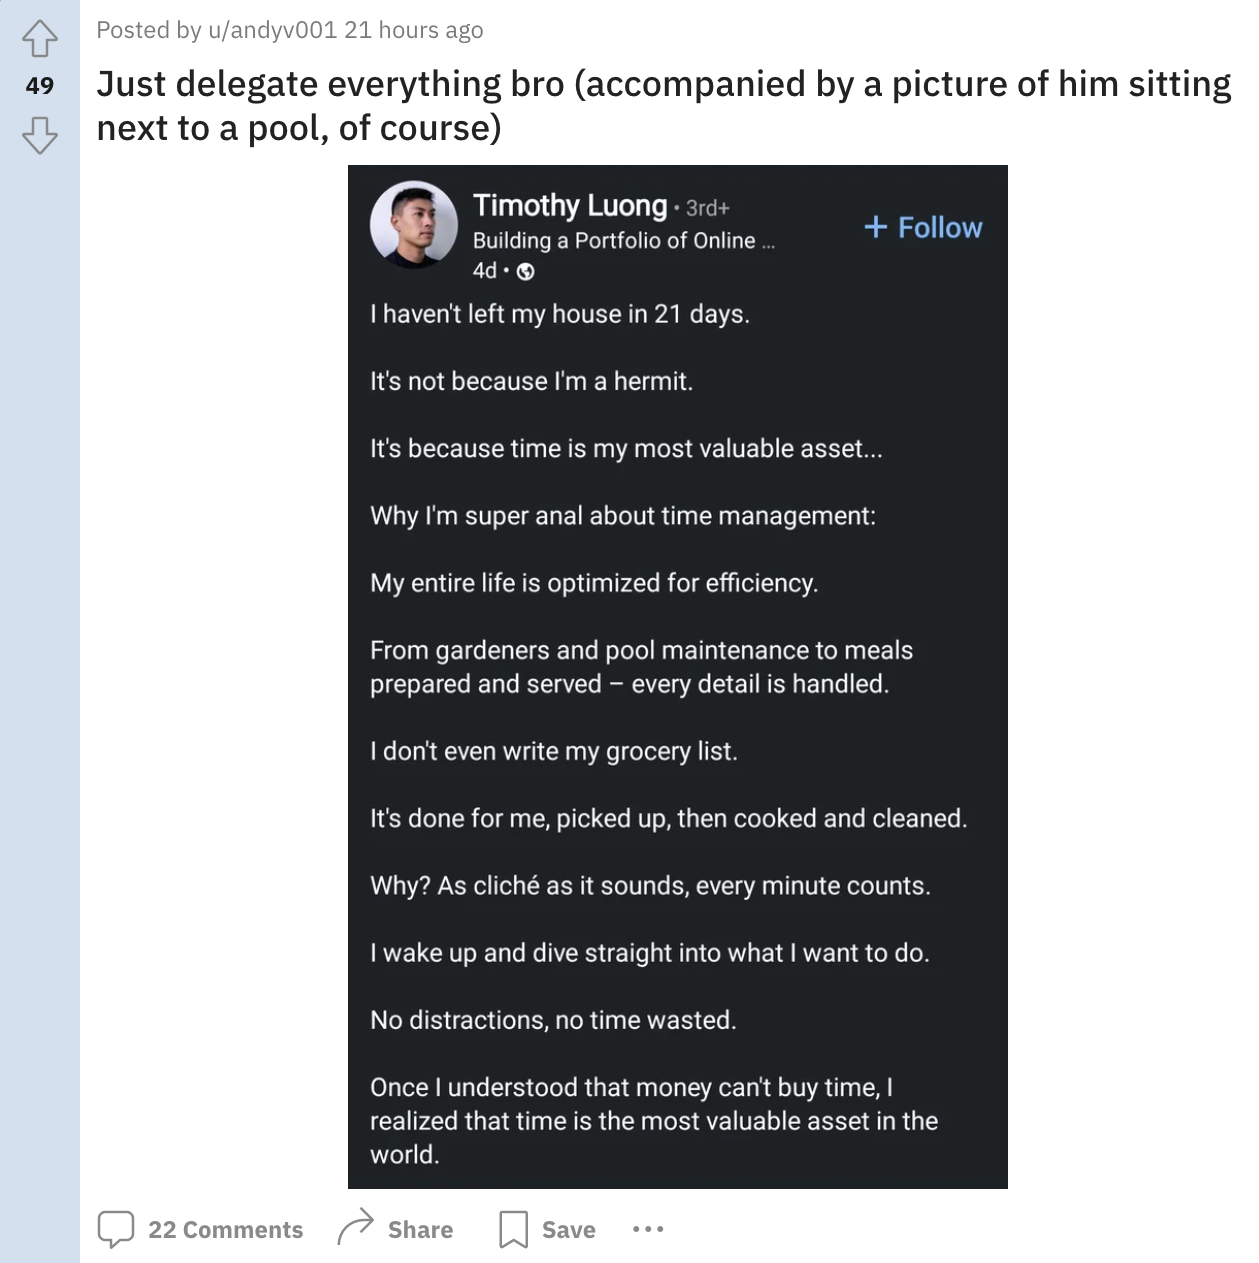 screenshot - Posted by uandyv001 21 hours ago 49 Just delegate everything bro accompanied by a picture of him sitting next to a pool, of course | Timothy Luong 3rde Building a Portfolio of Online 4d> I haven't left my house in 21 days. It's not because I'